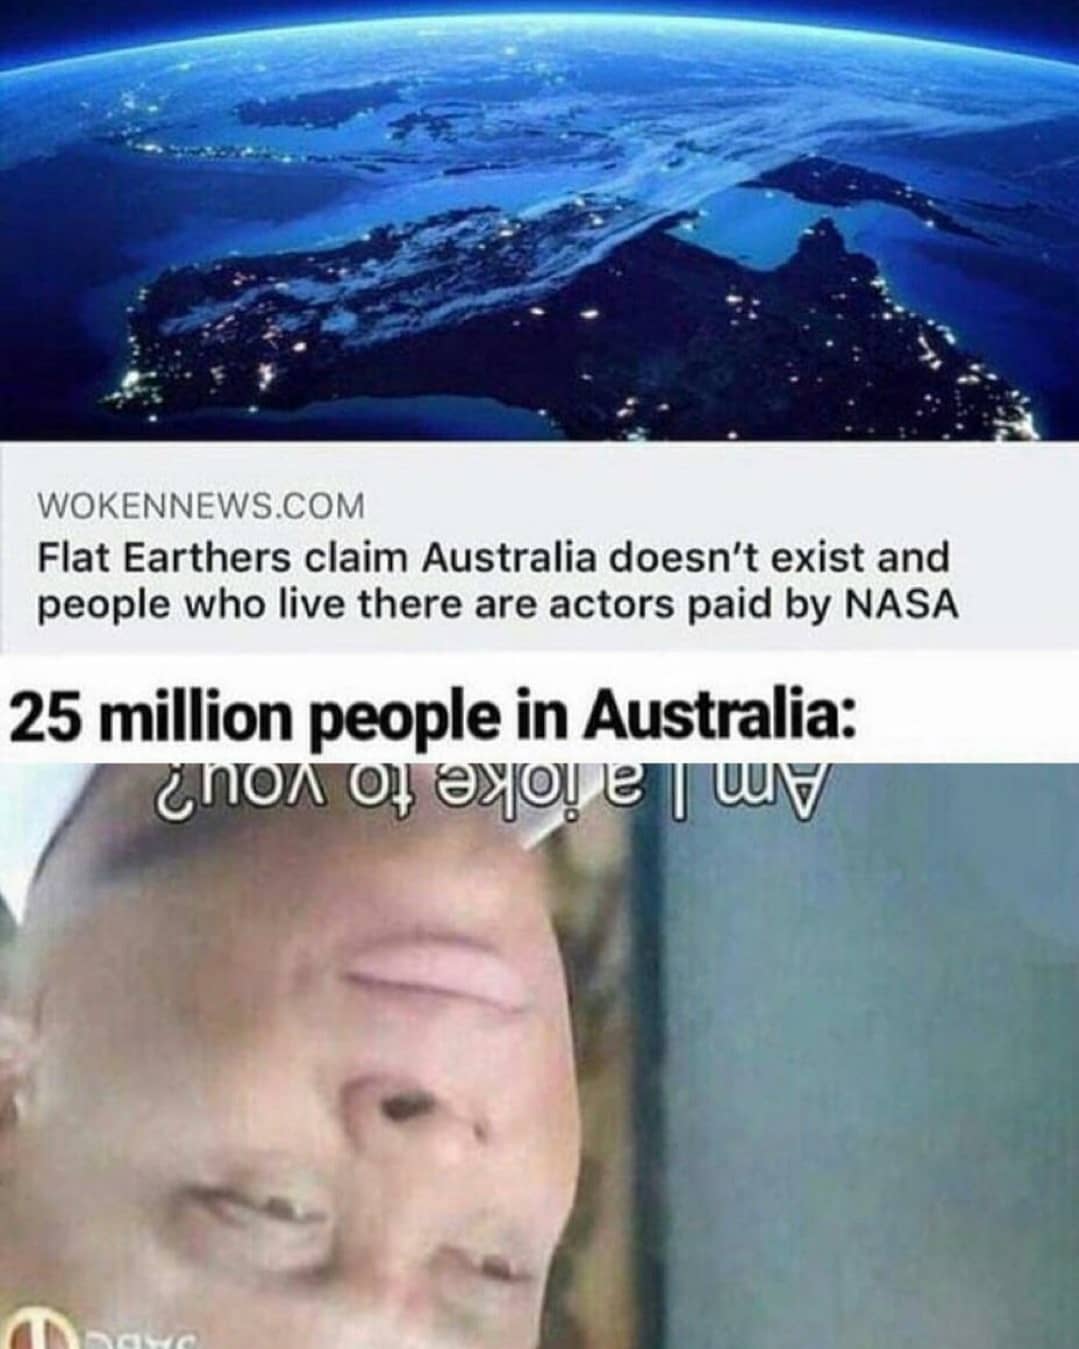 dank memes - flat earth australia meme - Wokennews.Com Flat Earthers claim Australia doesn't exist and people who live there are actors paid by Nasa 25 million people in Australia Con Oh eget e | Uuv aus